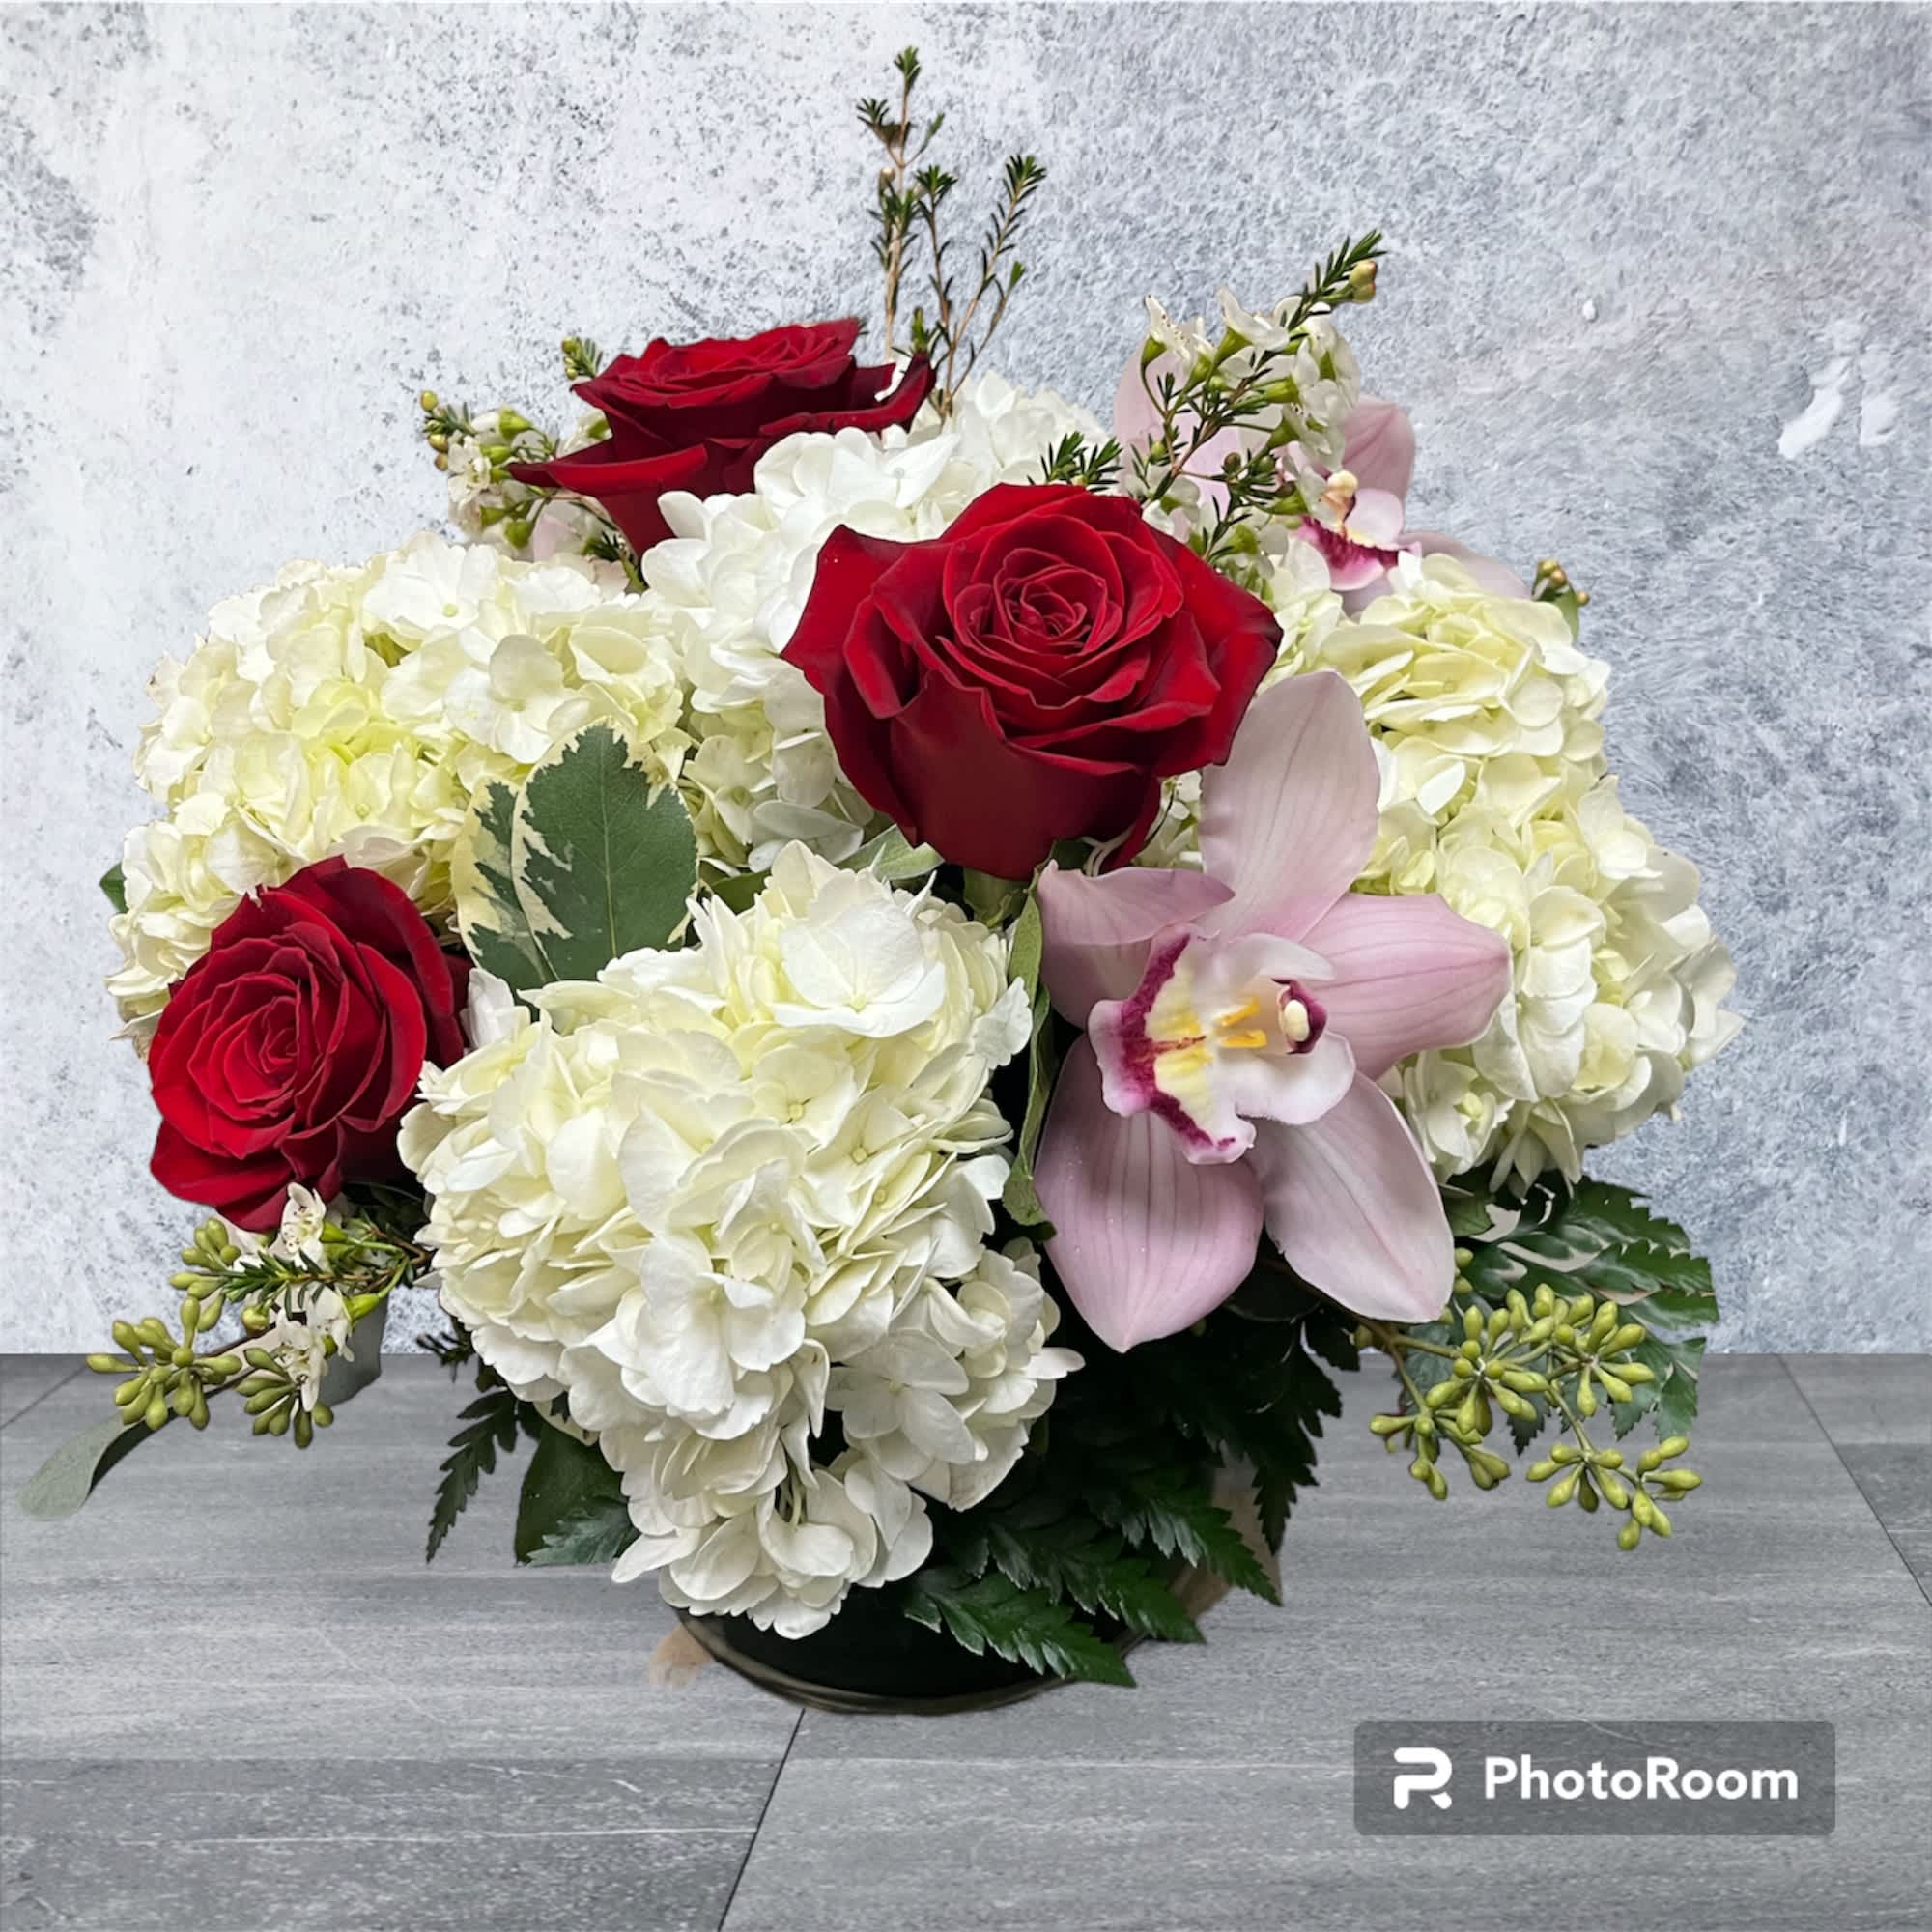 Romantic Twist with red roses  - If you are Looking for a modern romantic twist on the classic red roses, this bouquet is prefect. This arrangement is in a cylinder  containing hydrangea ,cymbidium orchids, and roses .